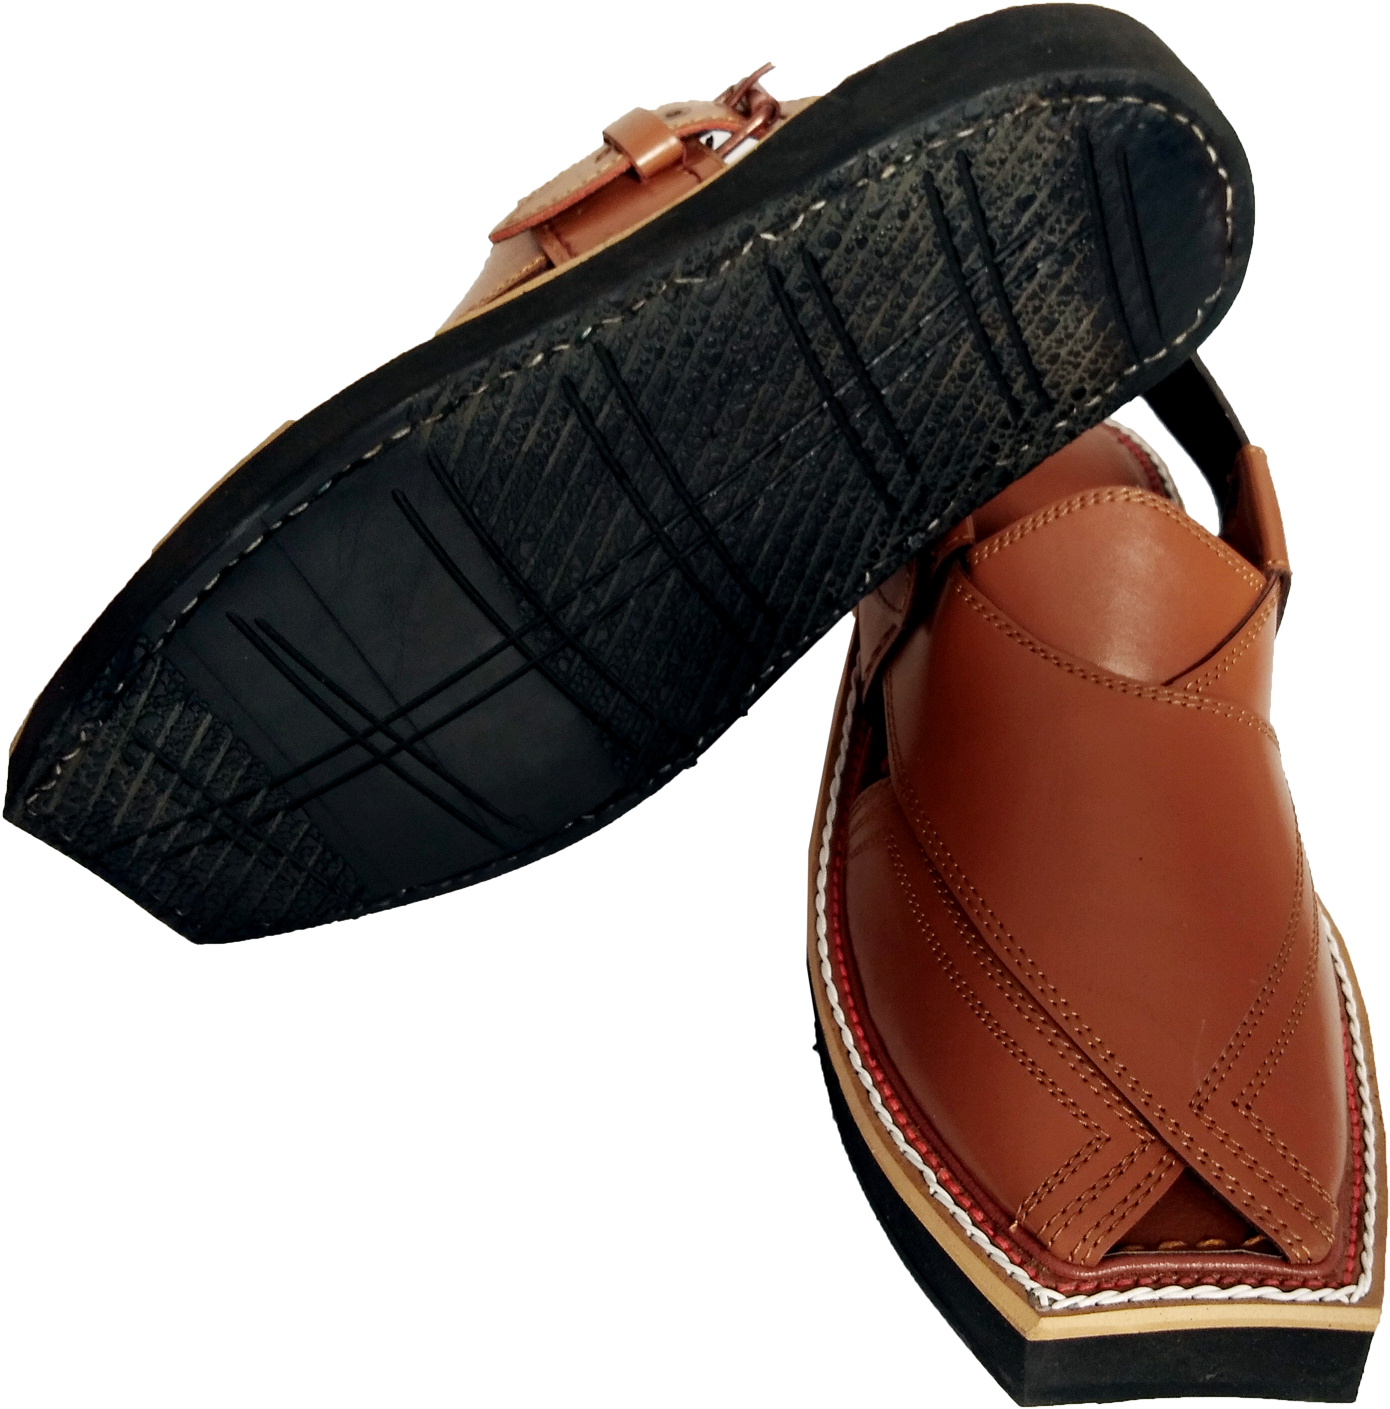 Brown Leather Sandal Isolated PNG